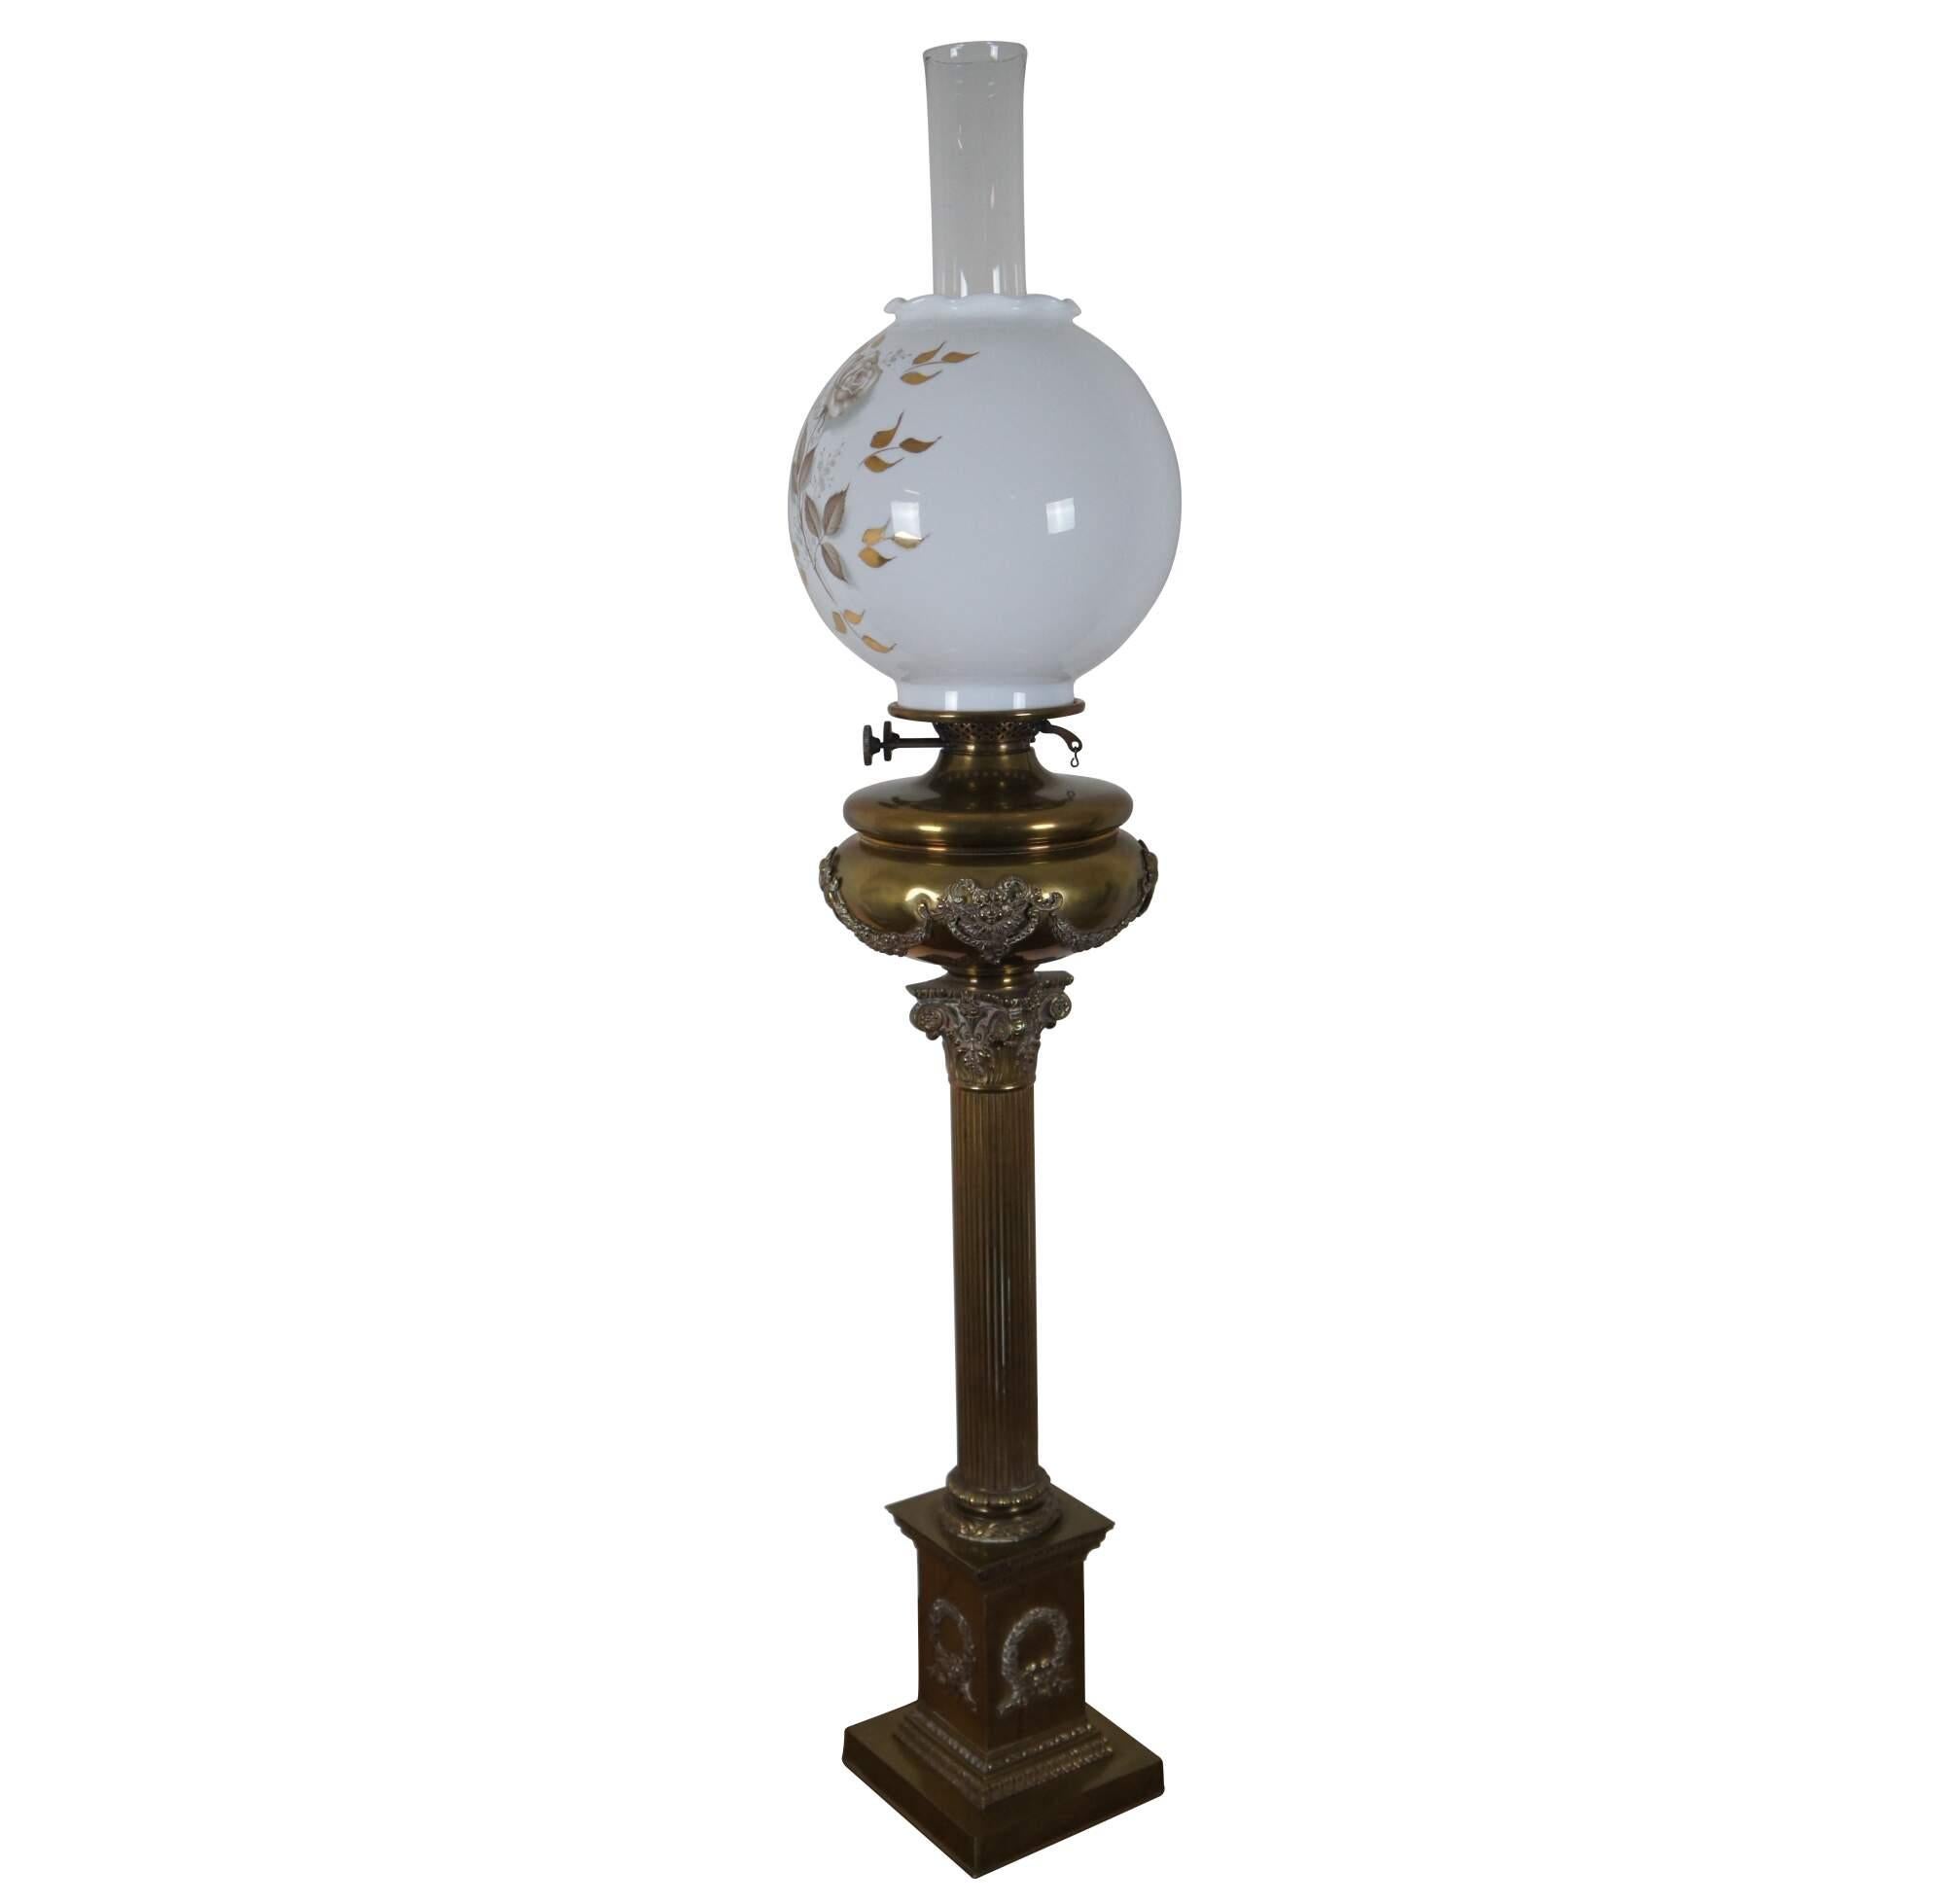 An exquisite antique English brass Duplex oil lamp, featuring a tall base in the shape of a Corinthian column festooned with cherub / satyr faces and leaurel wreaths / swag. The milk glass shade features a scalloped upper edge and tranferware brown